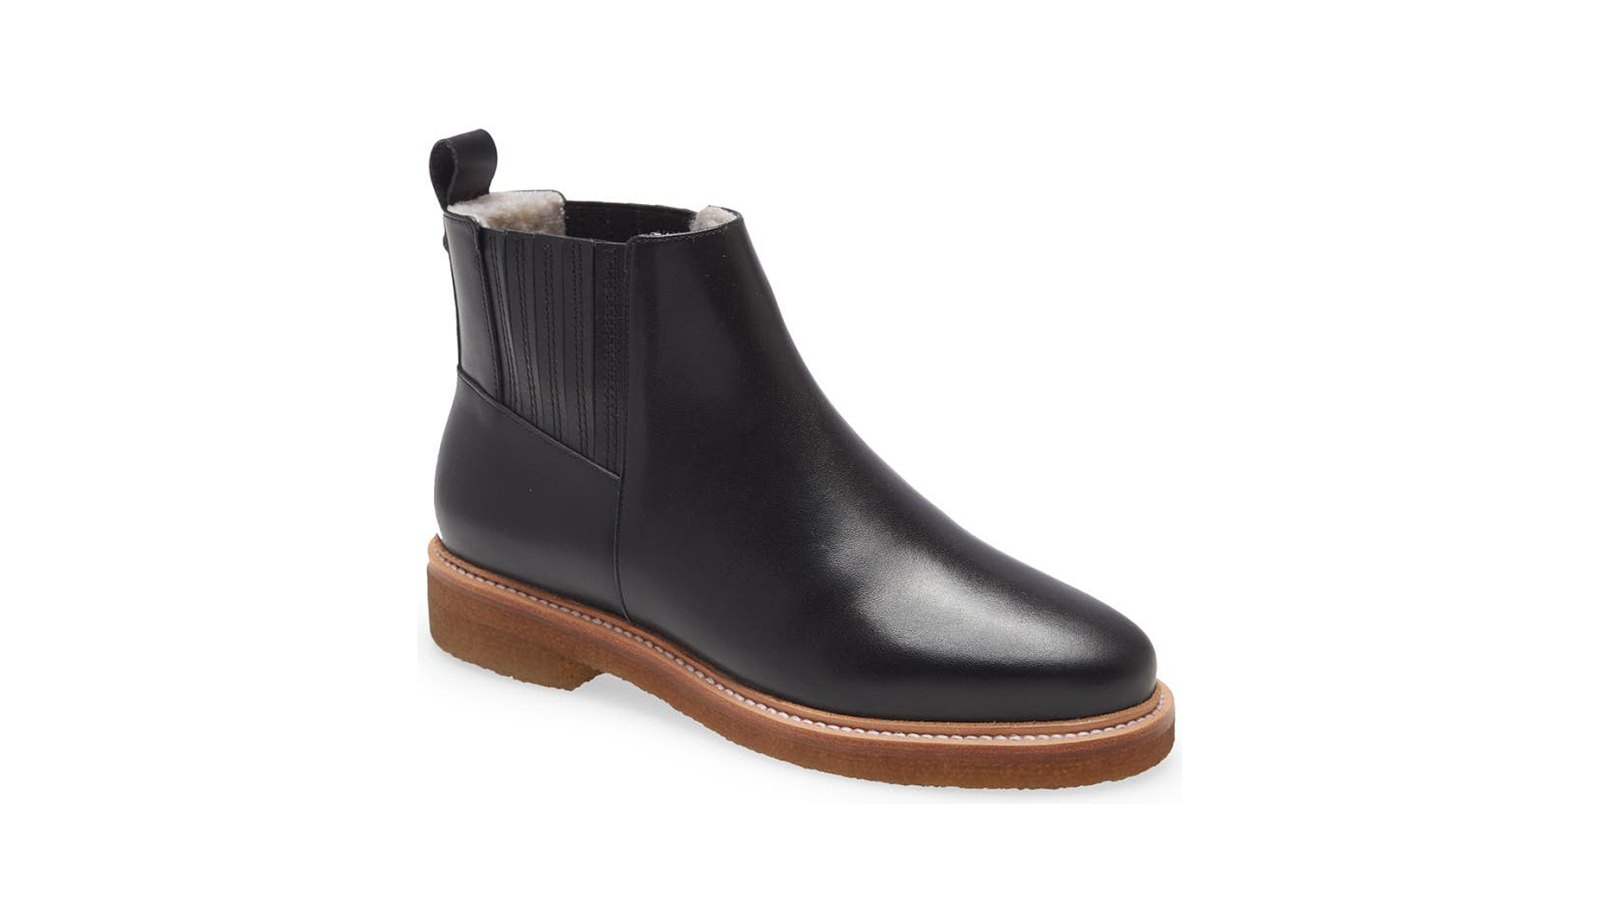 nordstrom-botkier-chelsea-boot-sherpa-lined